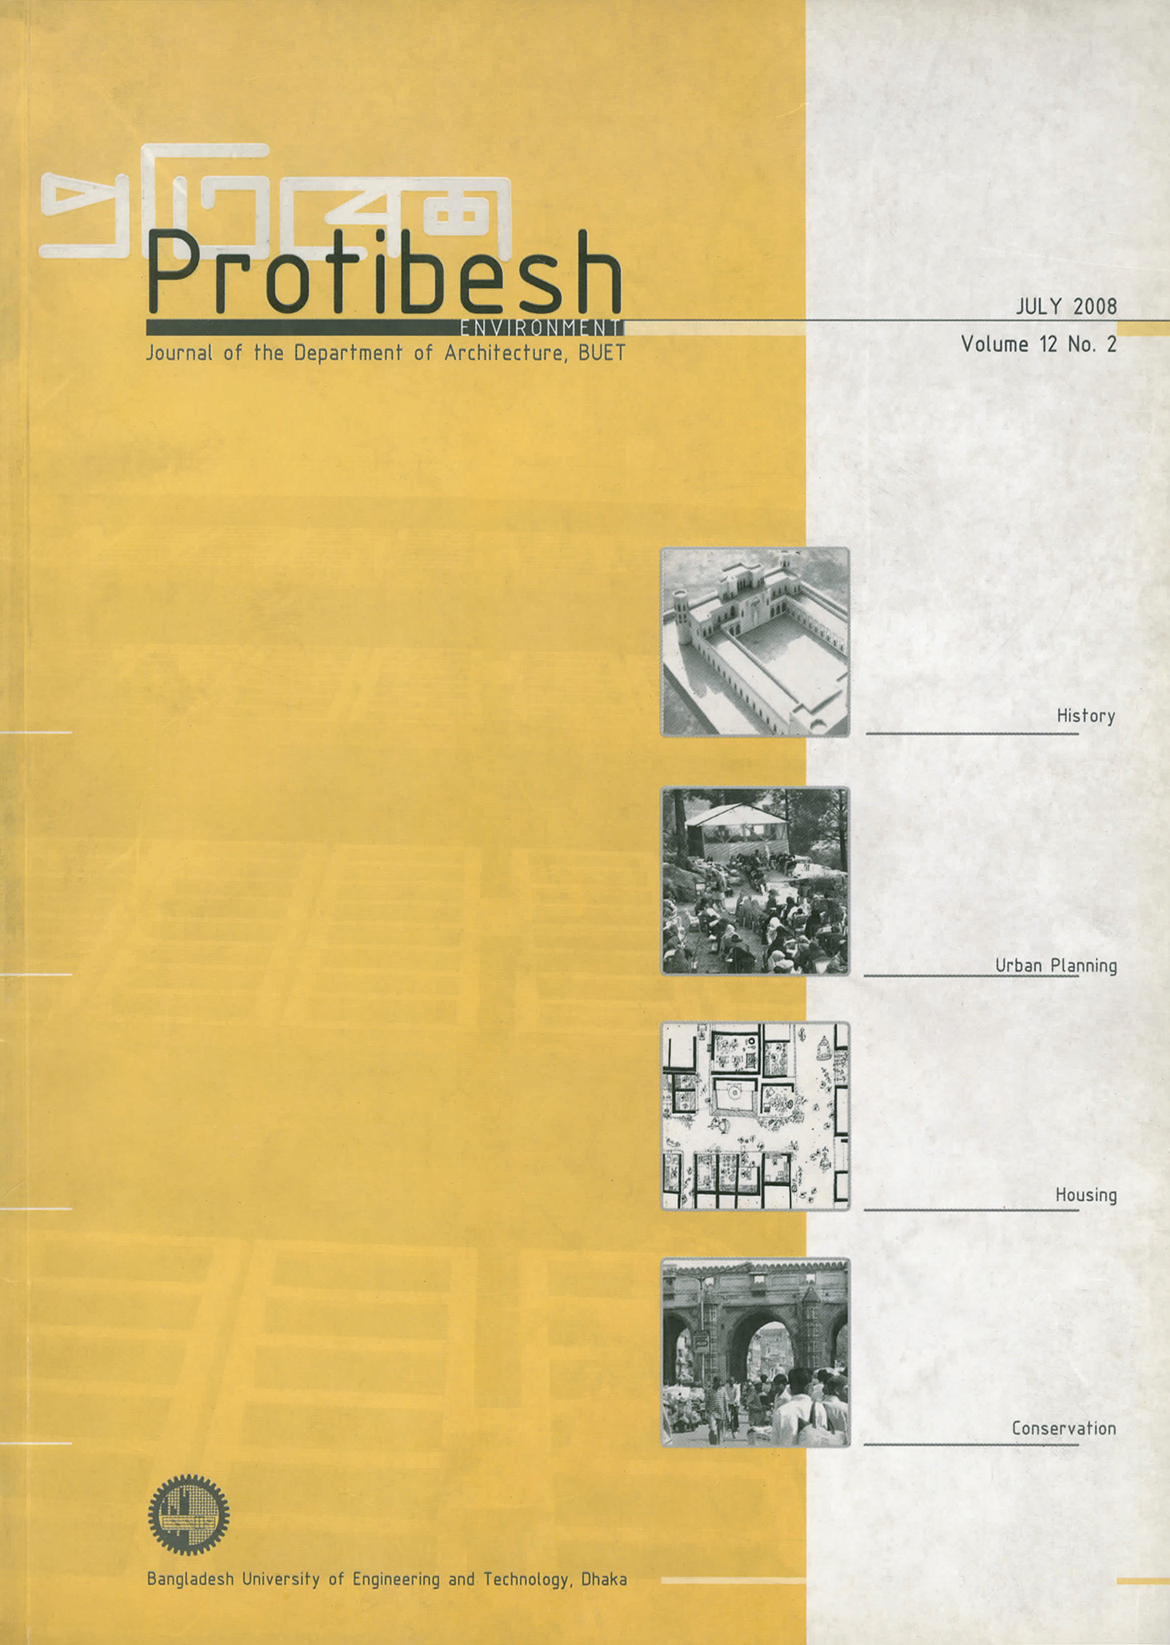 Cover image of Protibesh Vol-12 No-02 July-2008 - Journal of the Department of Architecture, BUET